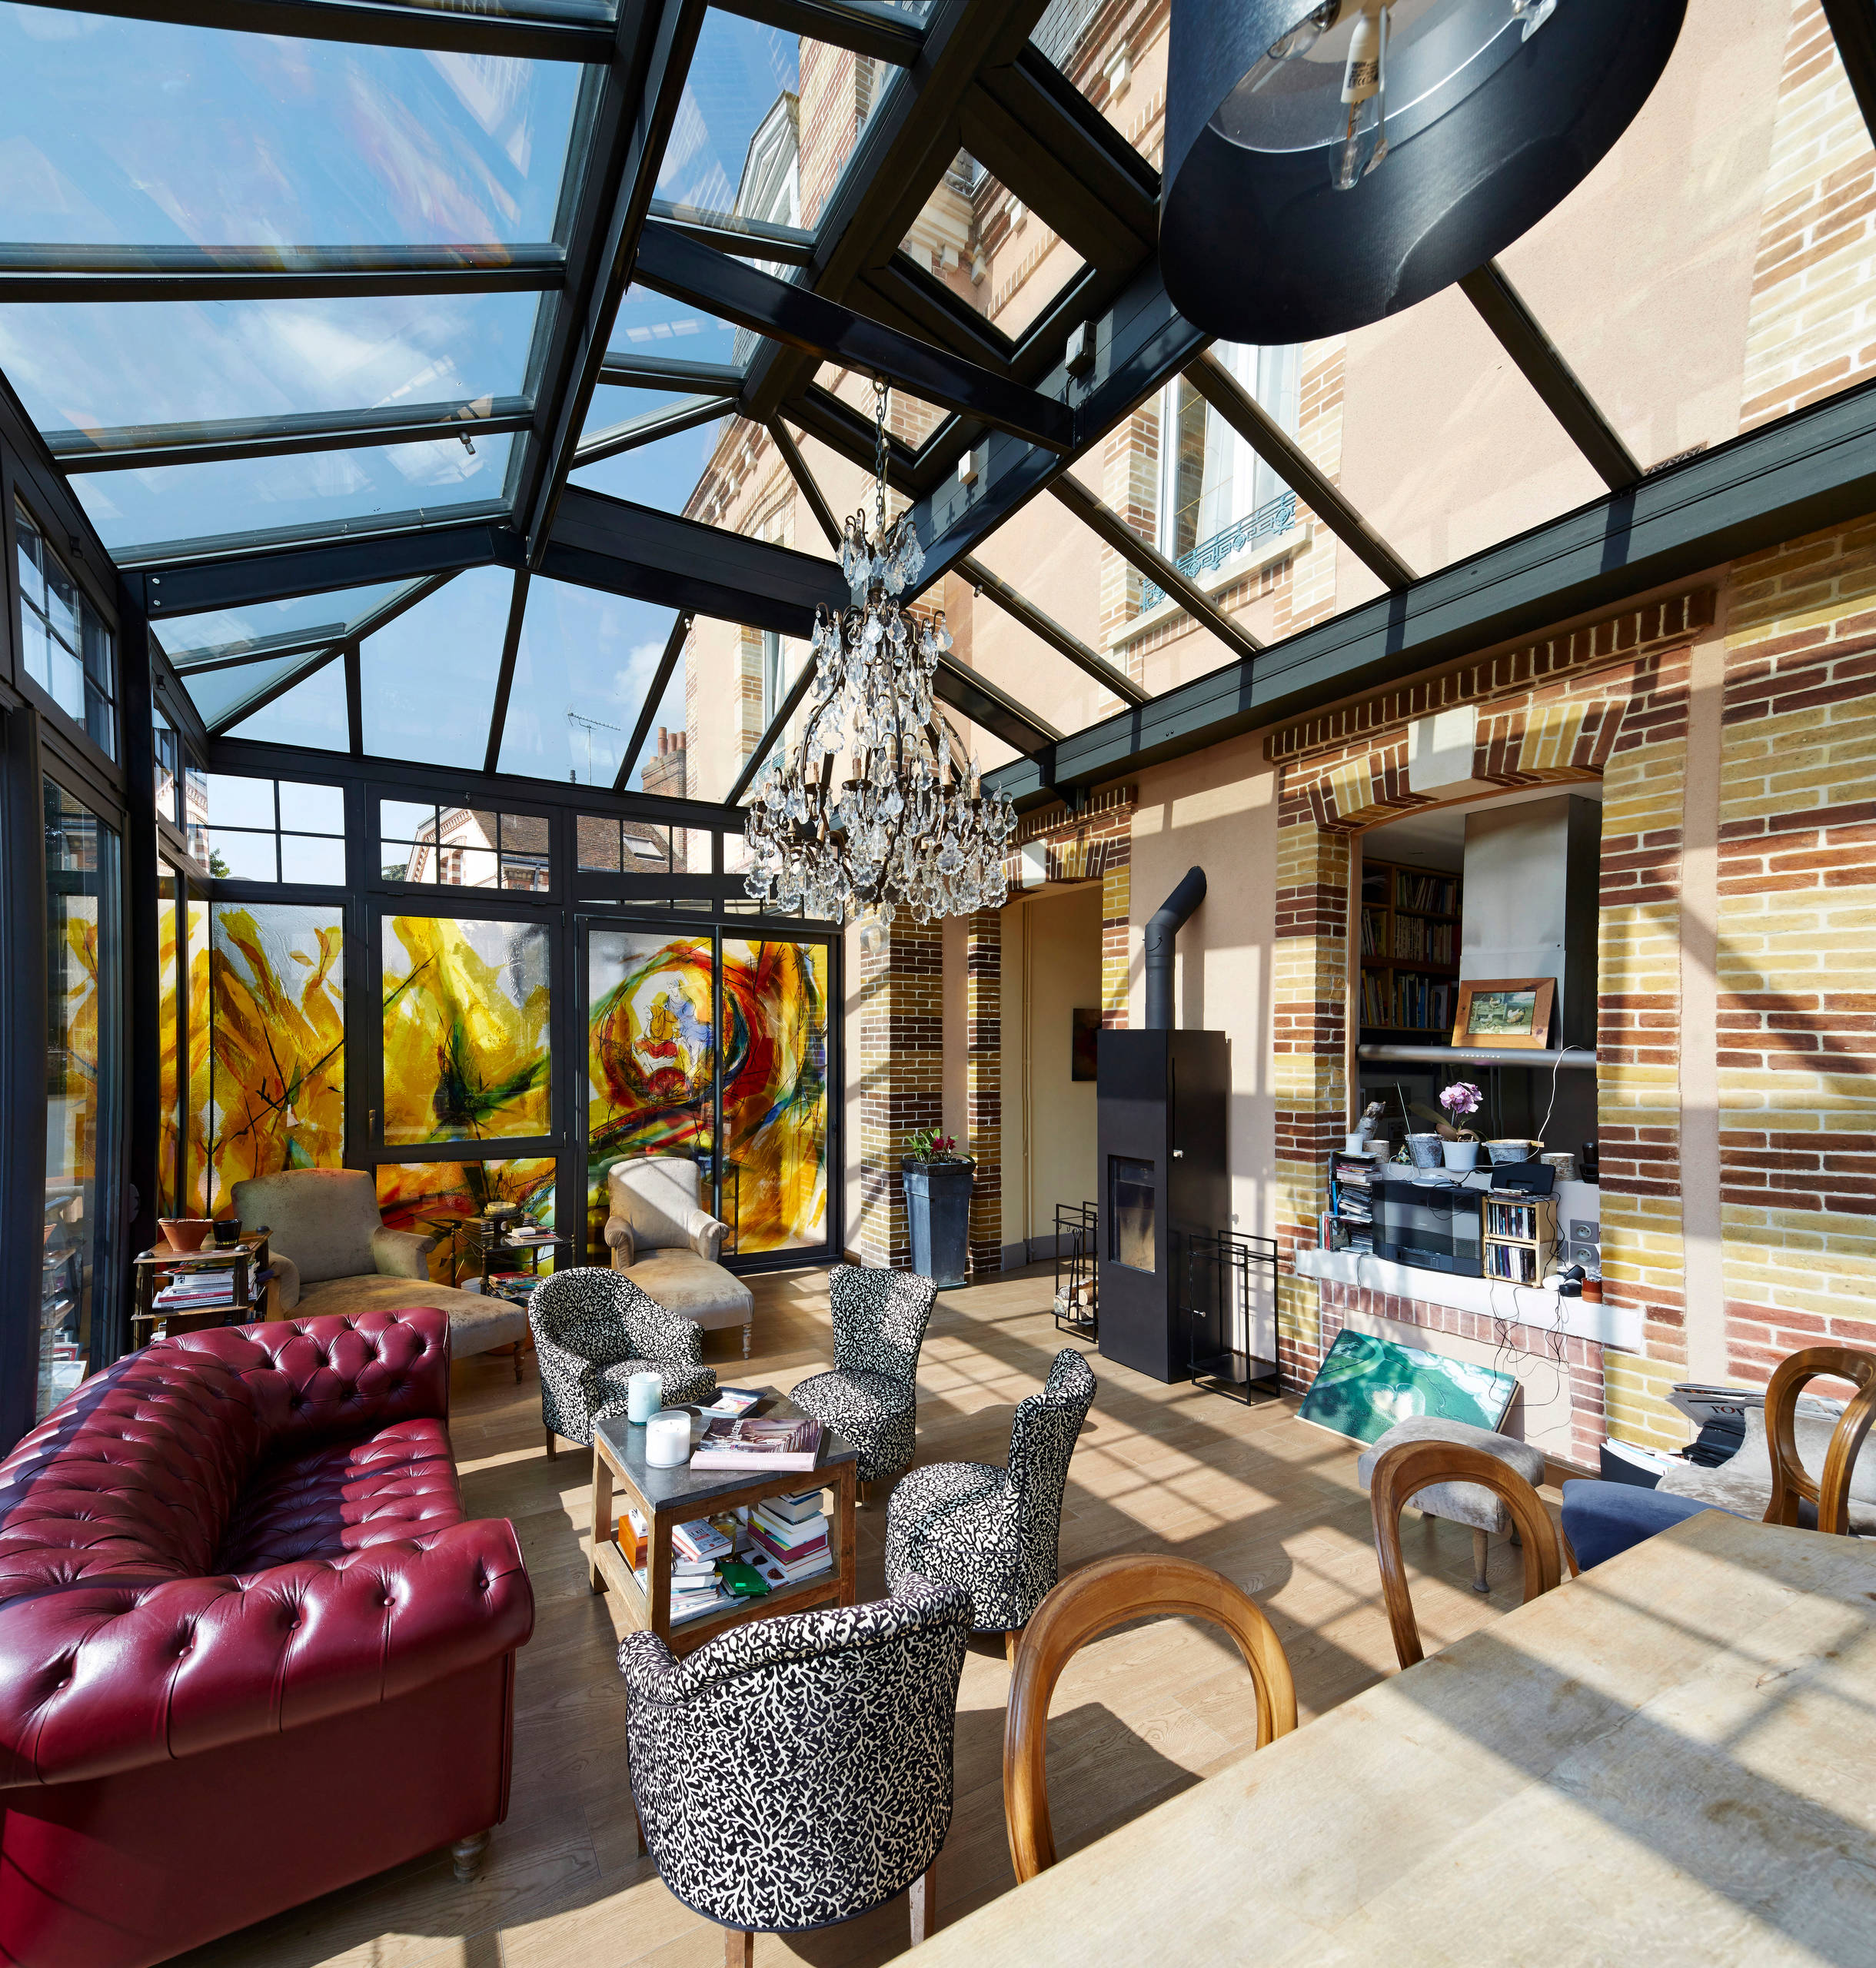 Reportage Véranda Magazine - Eclectic - Sunroom - Other - by François  Delauney | Houzz